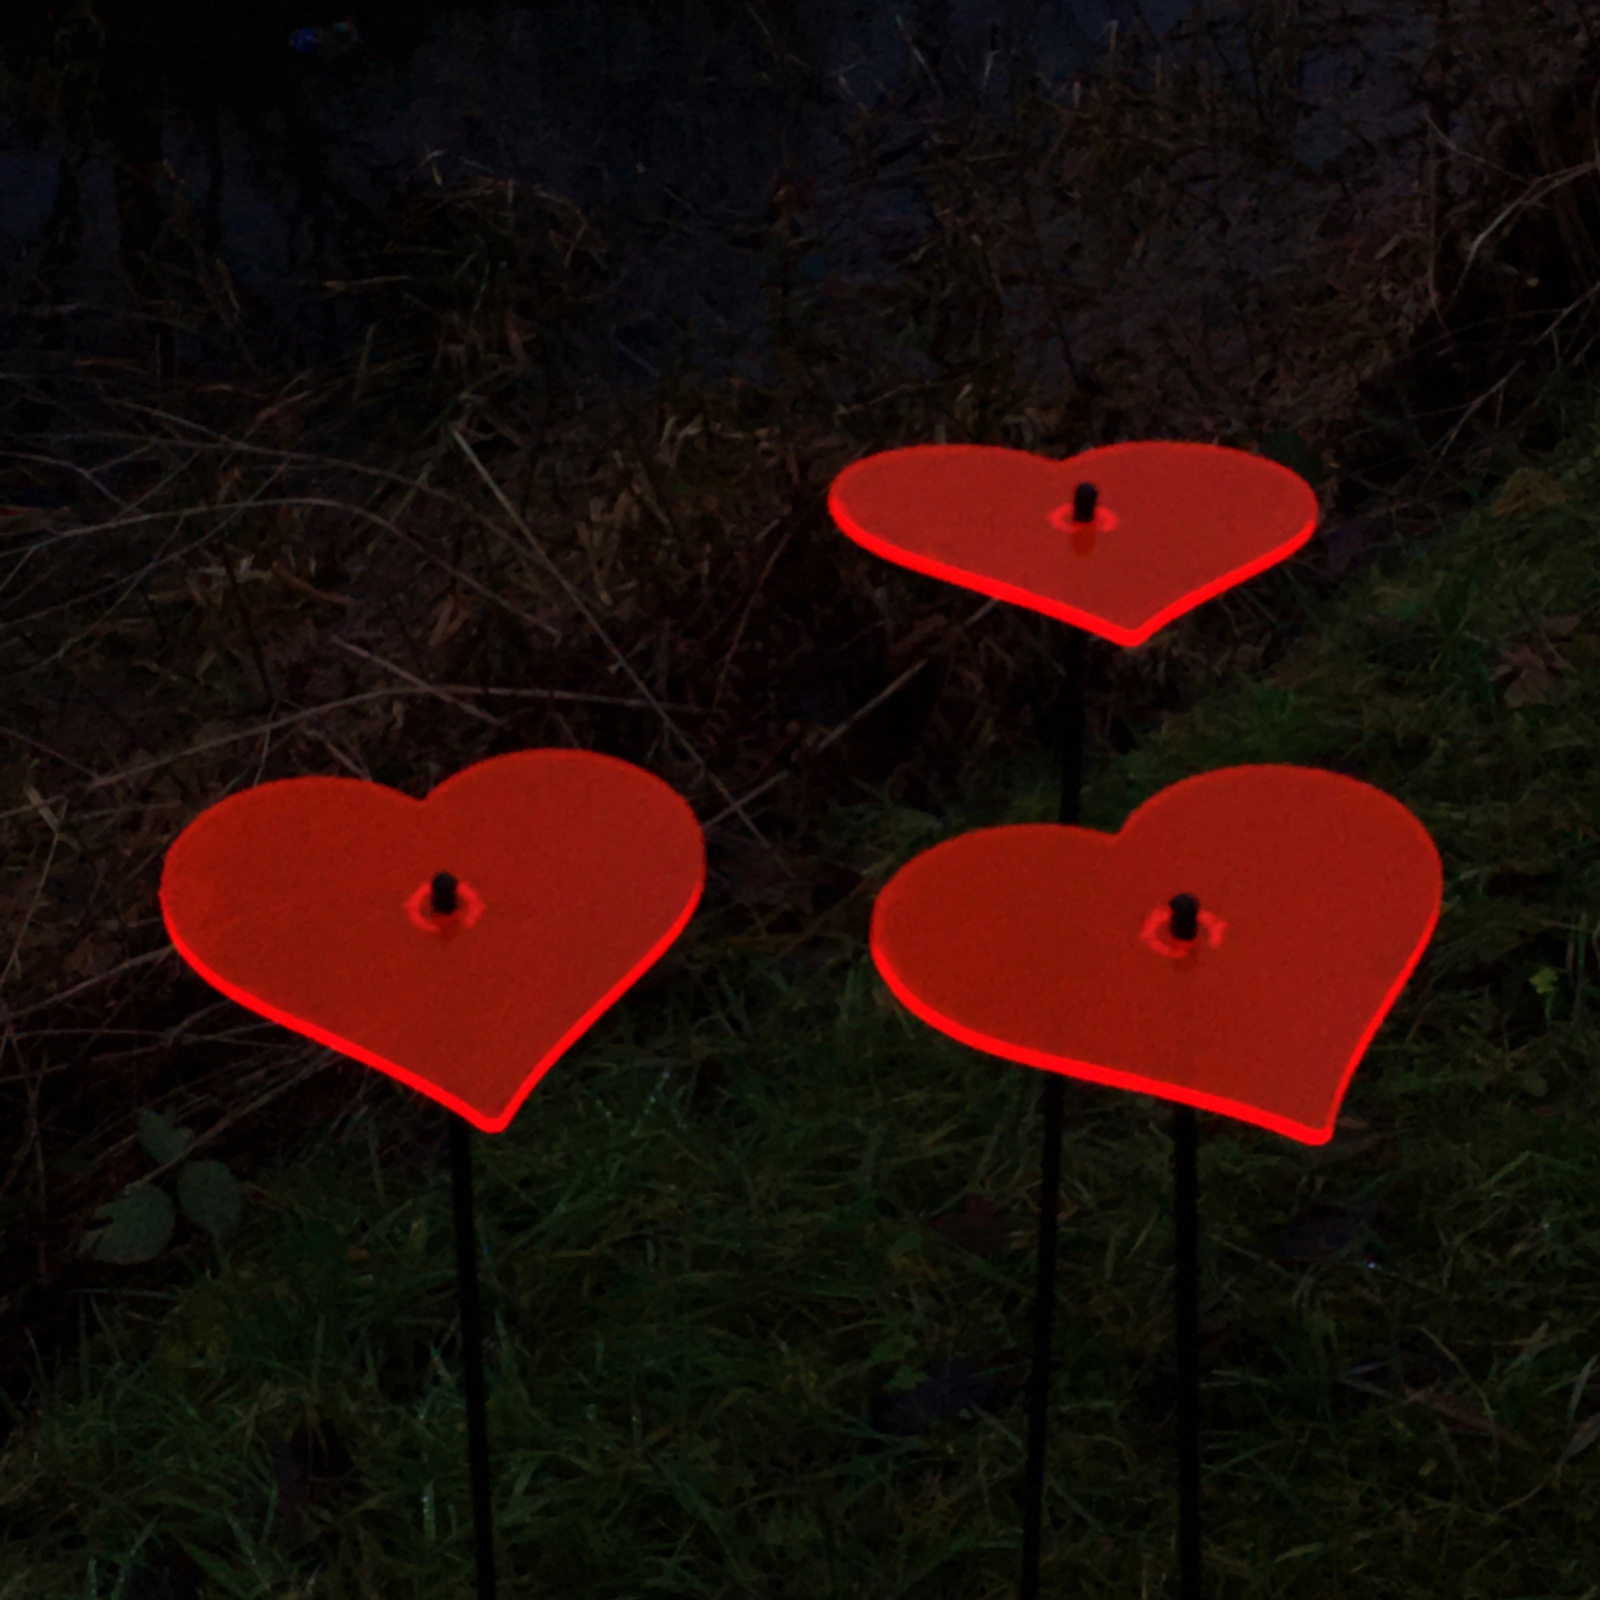 75cm Red Heart Garden Stakes 3 Pack